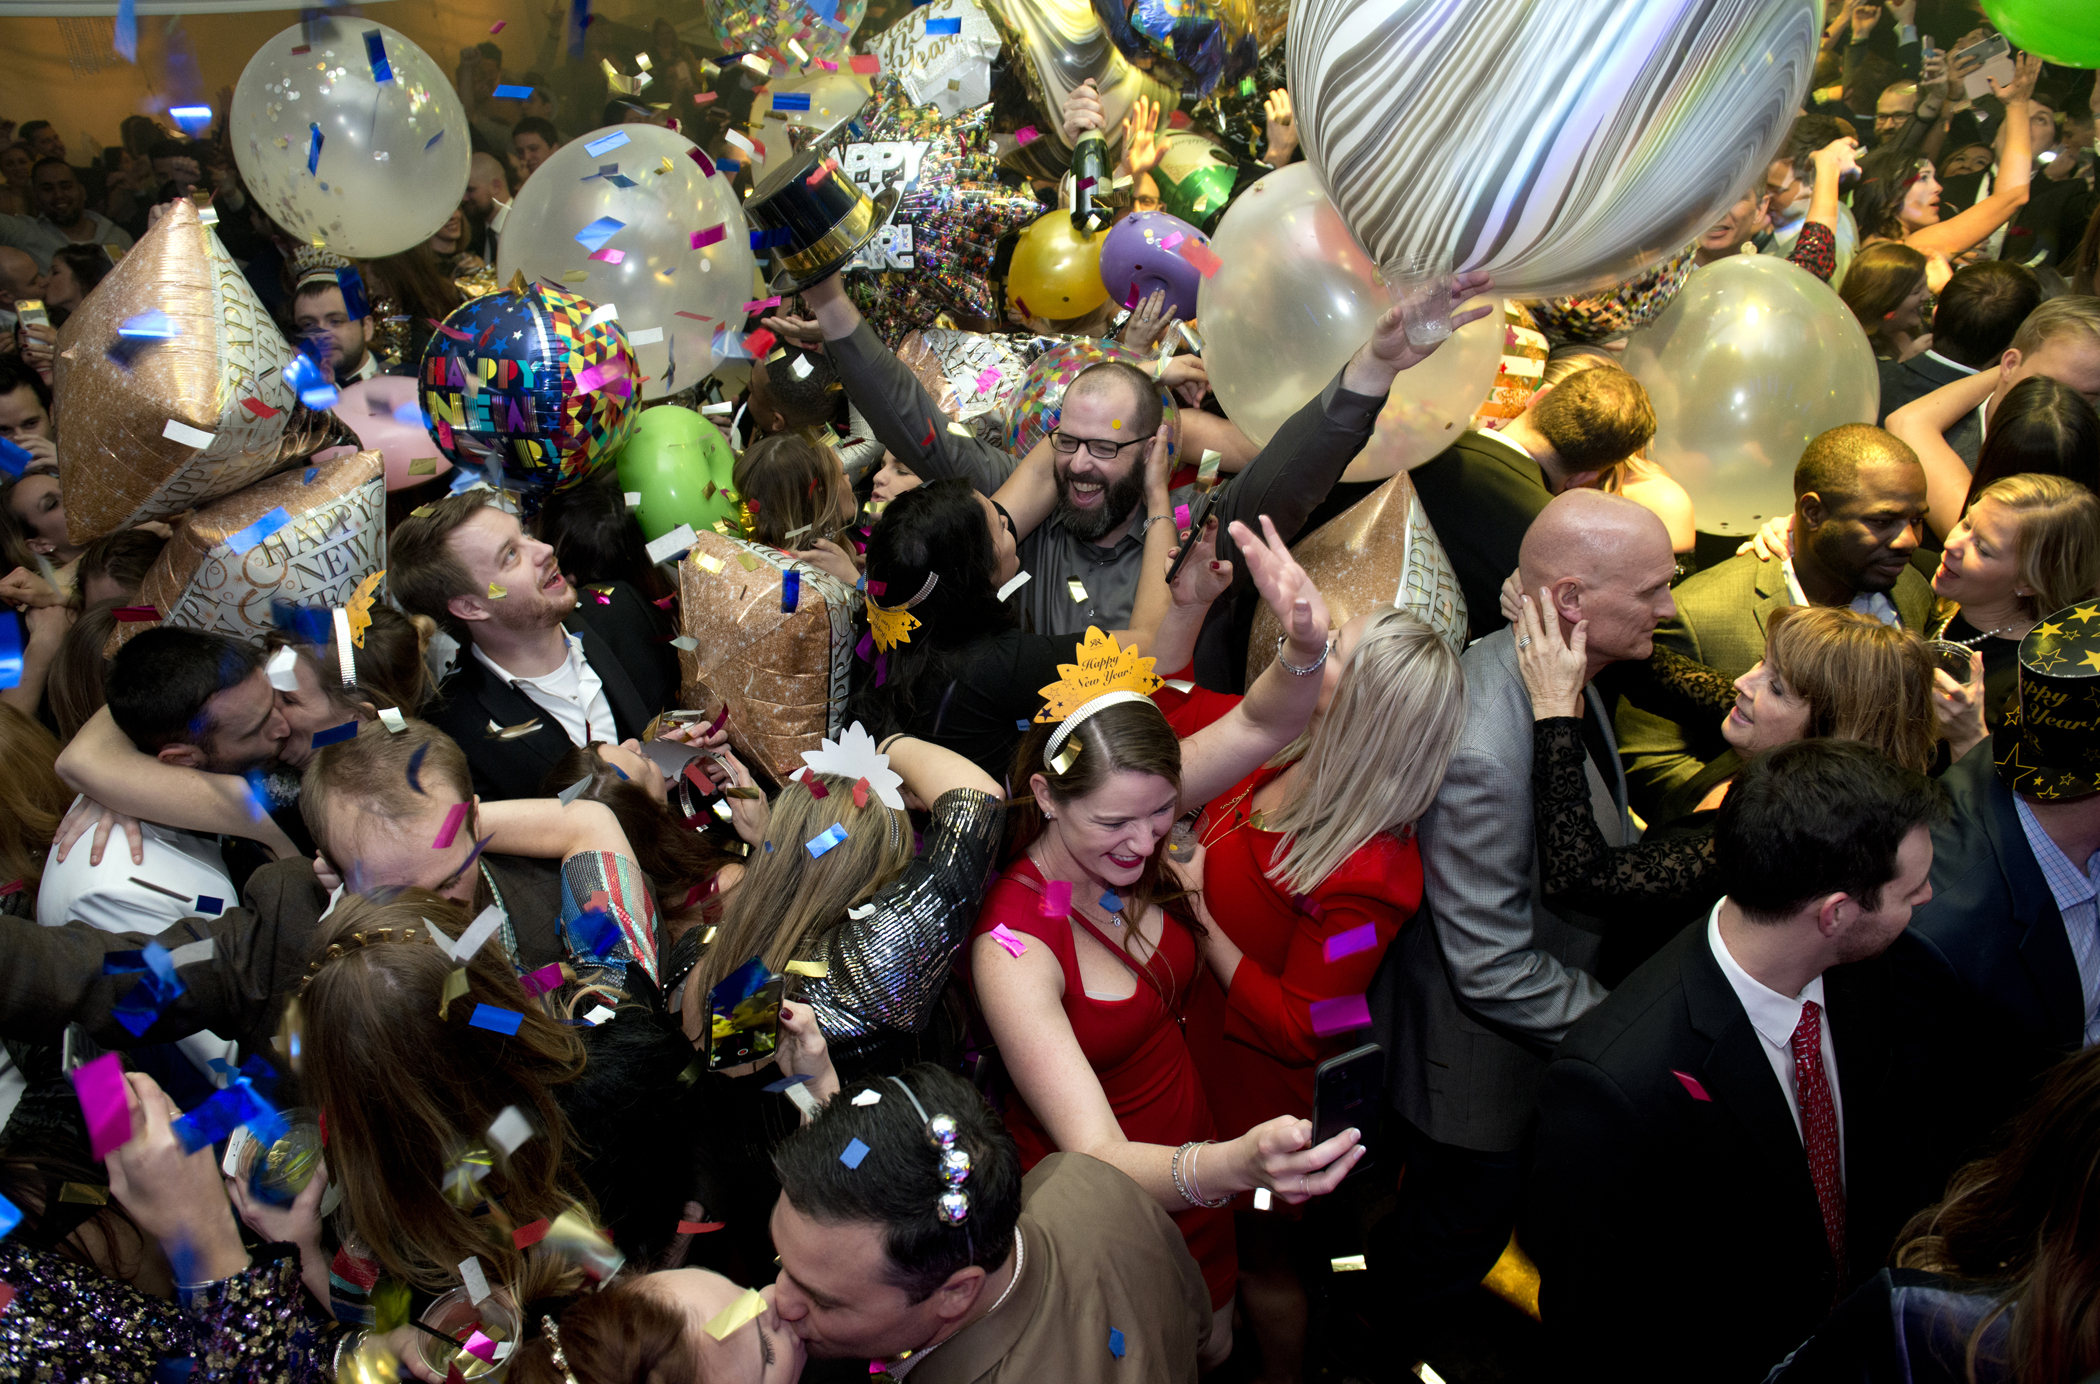 Taken from above, a group of people celebrate with balloons and confetti.